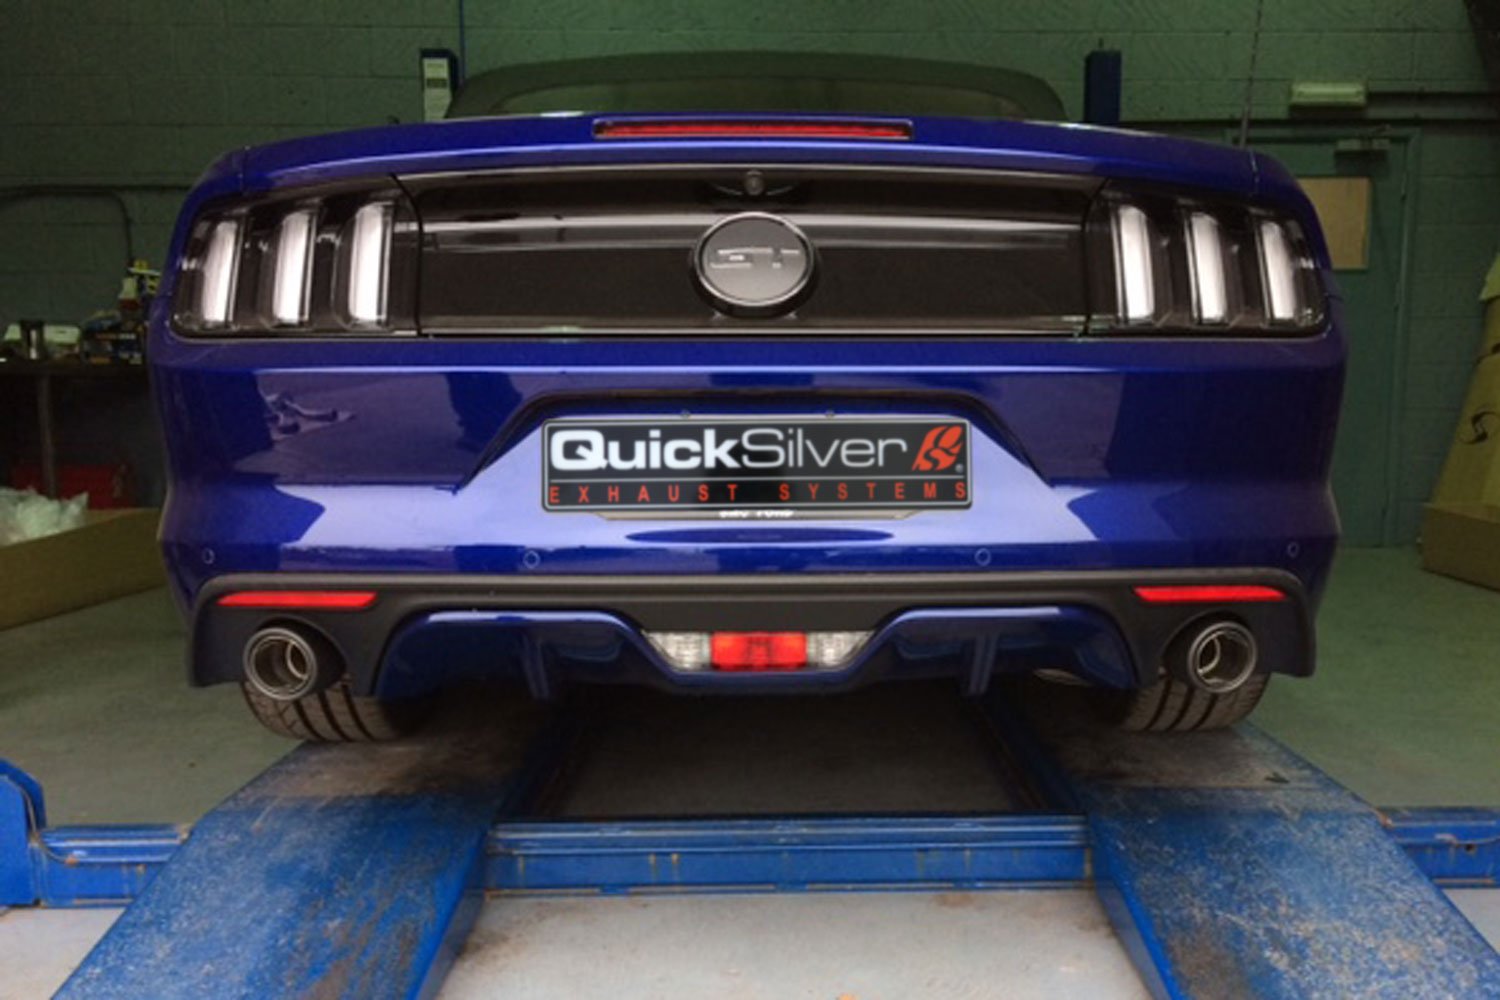 Ford Mustang 2.3 Ecoboost - Sport Exhaust with Y-Pipe and Twin Carbon Tips (2015-18)